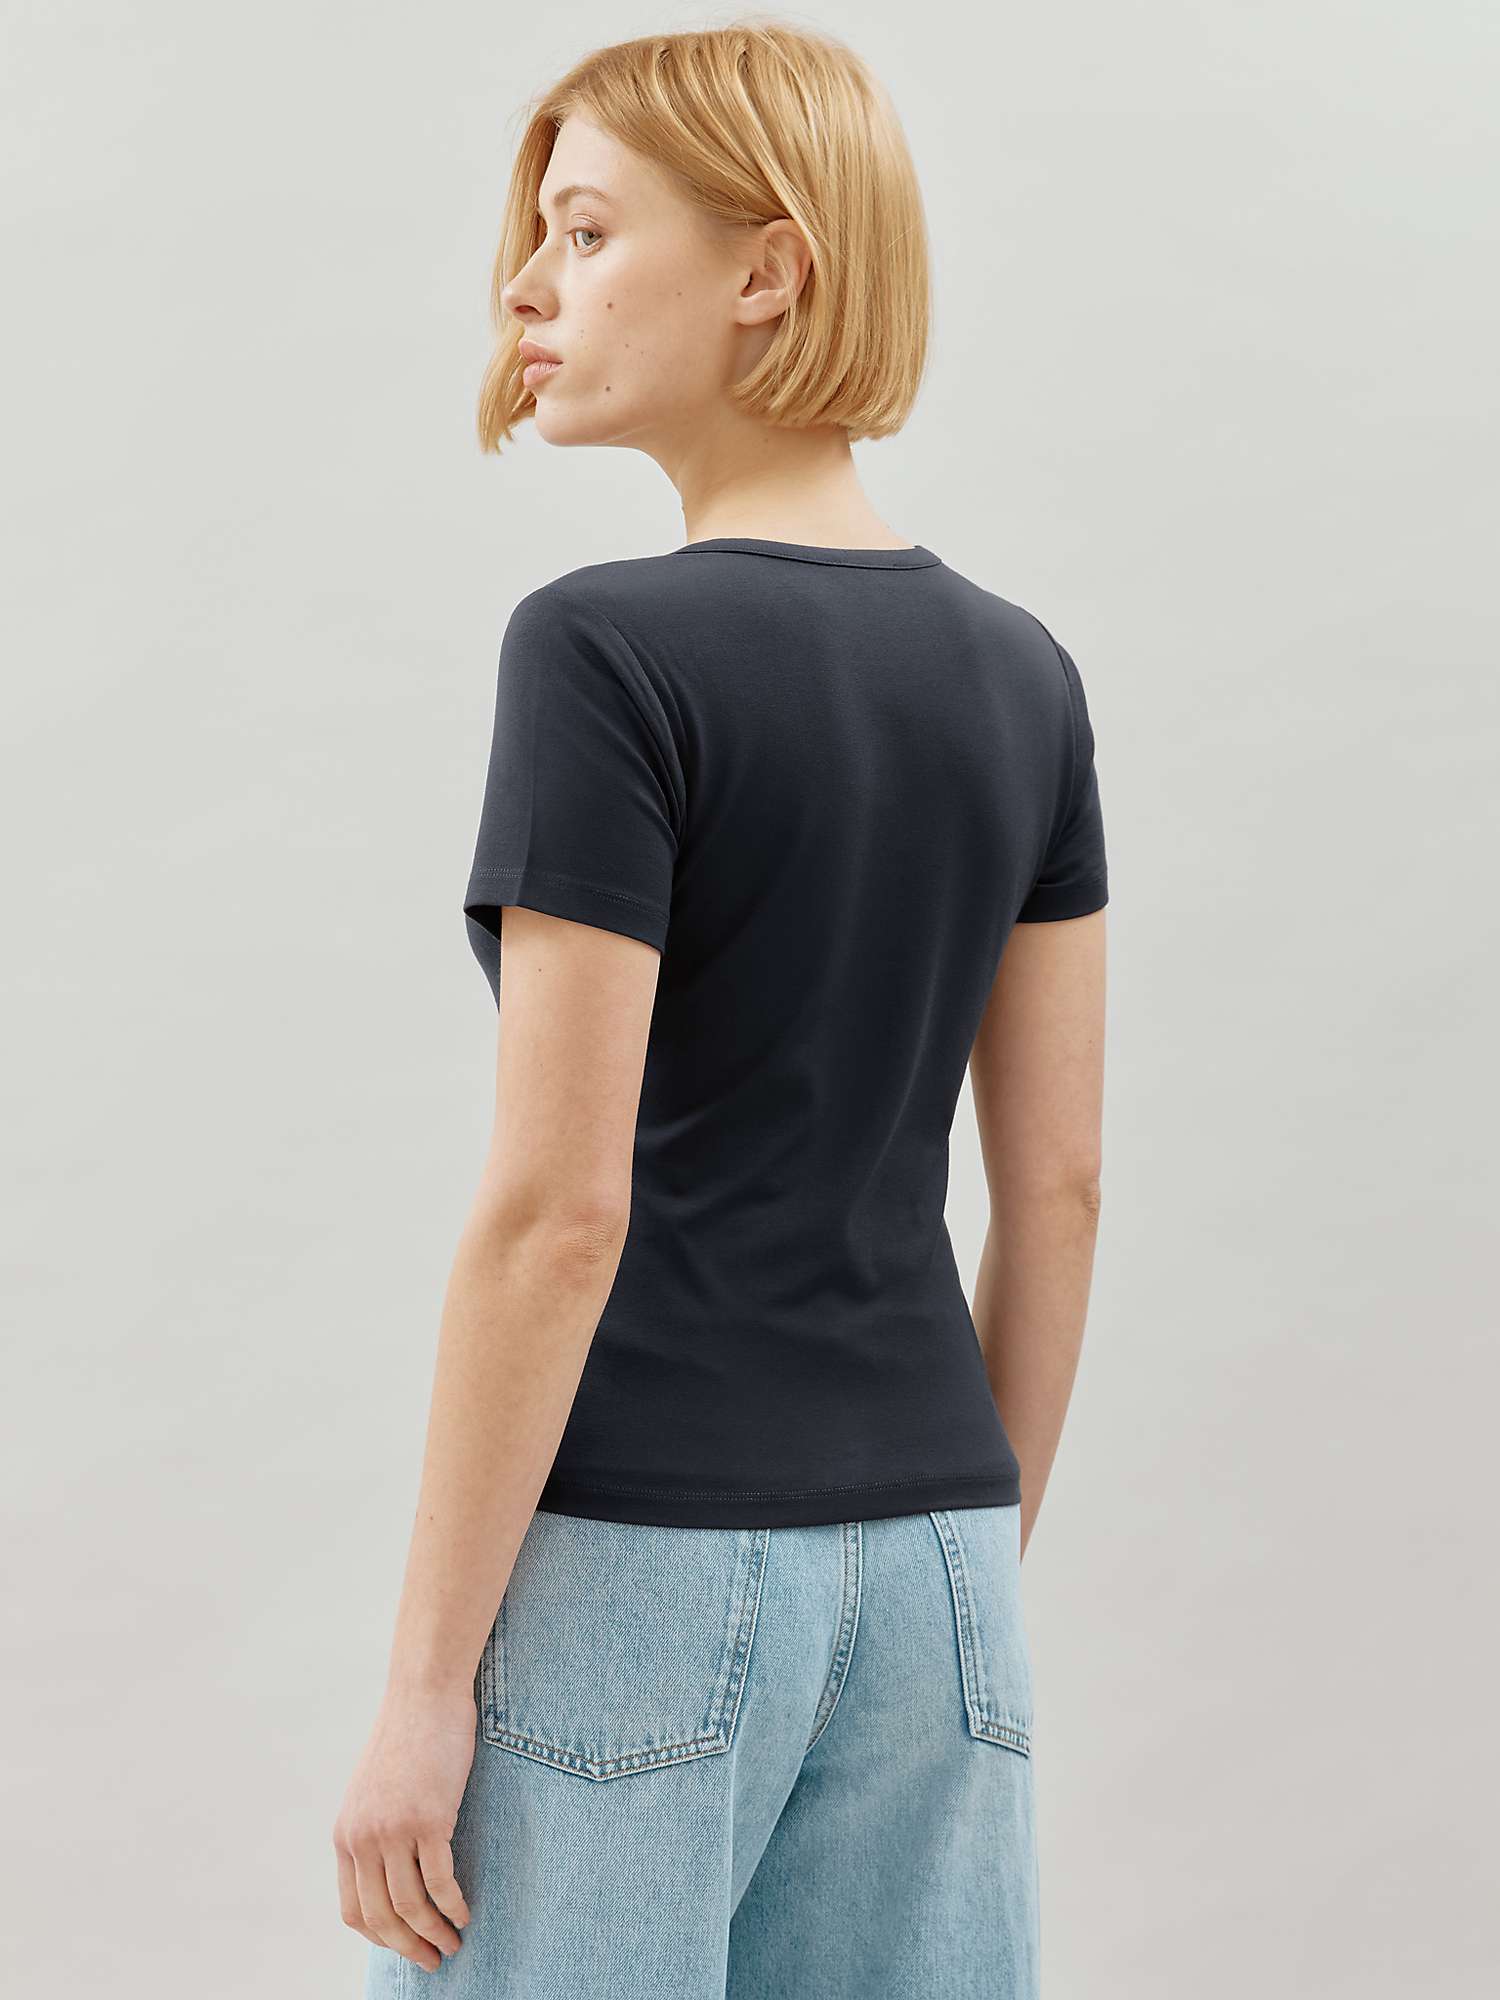 Buy Albaray Fitted T-Shirt, Navy Online at johnlewis.com